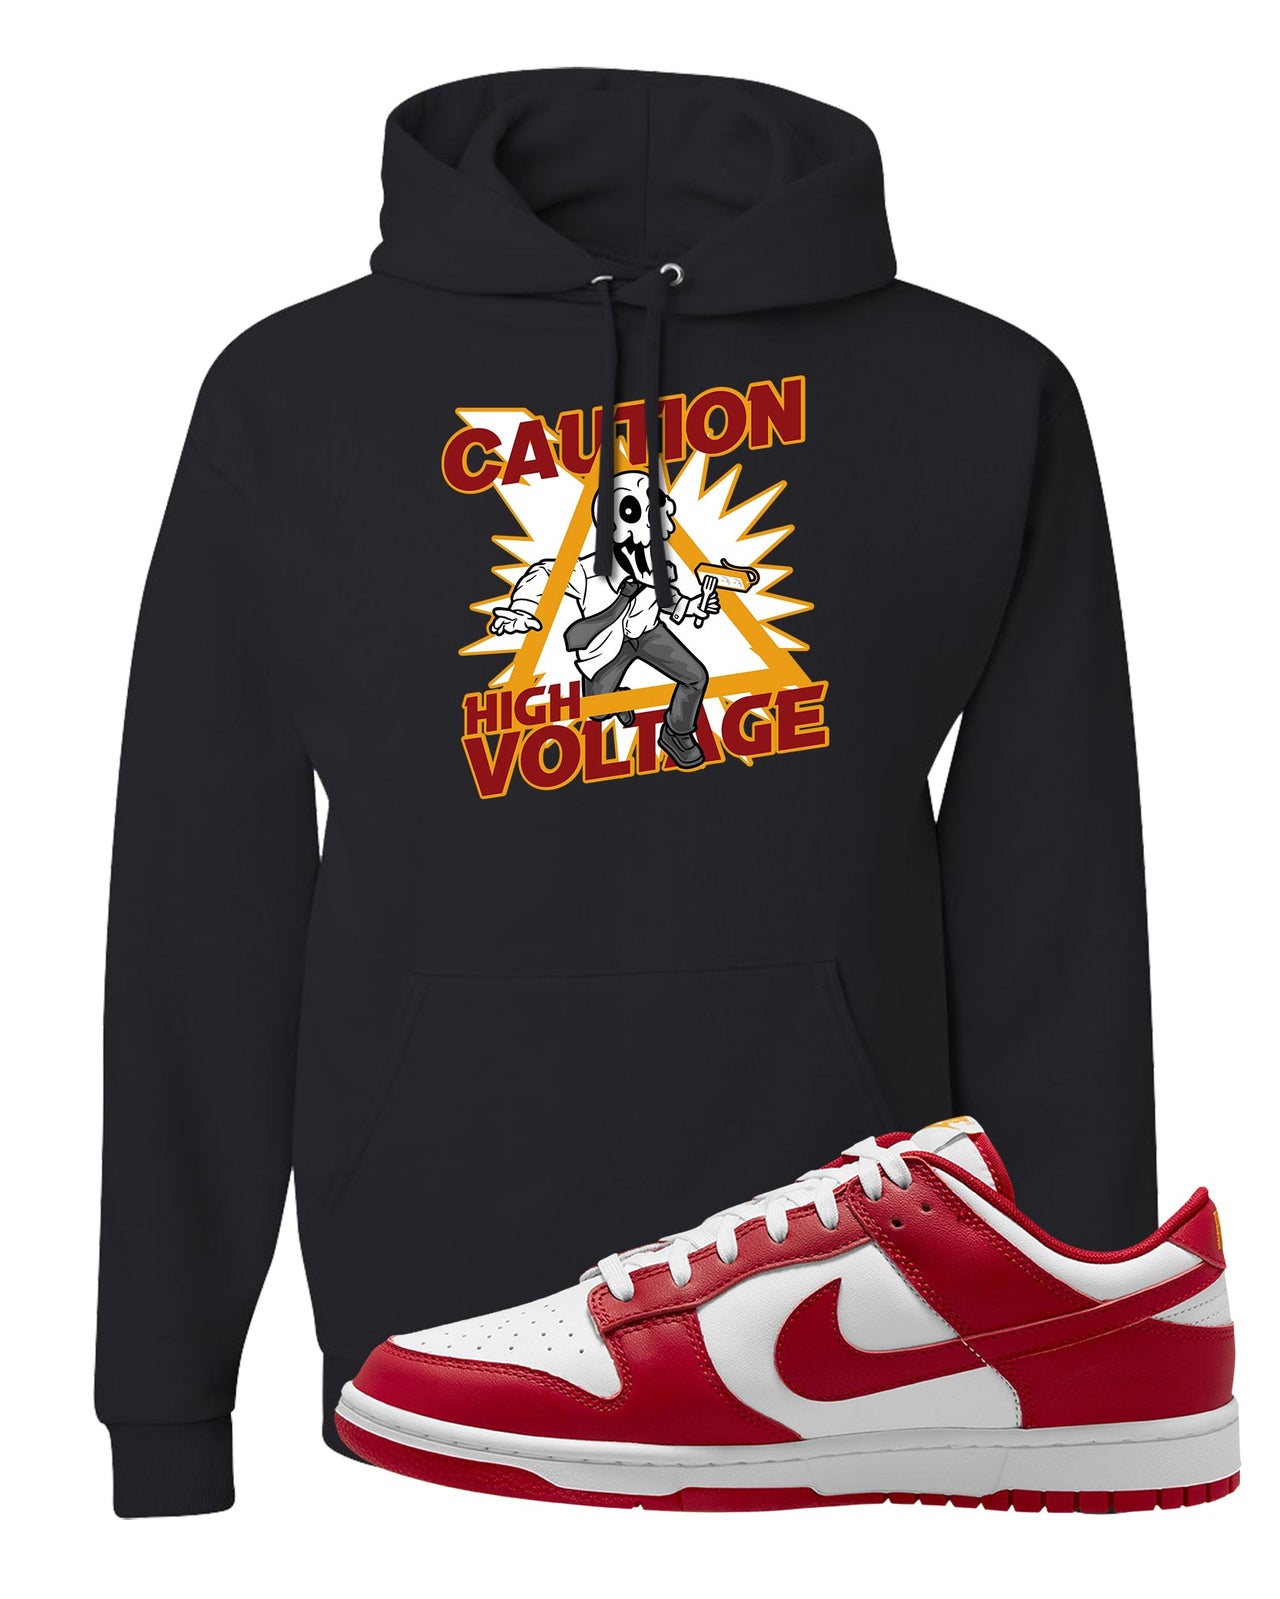 Red White Yellow Low Dunks Hoodie | Caution High Voltage, Black